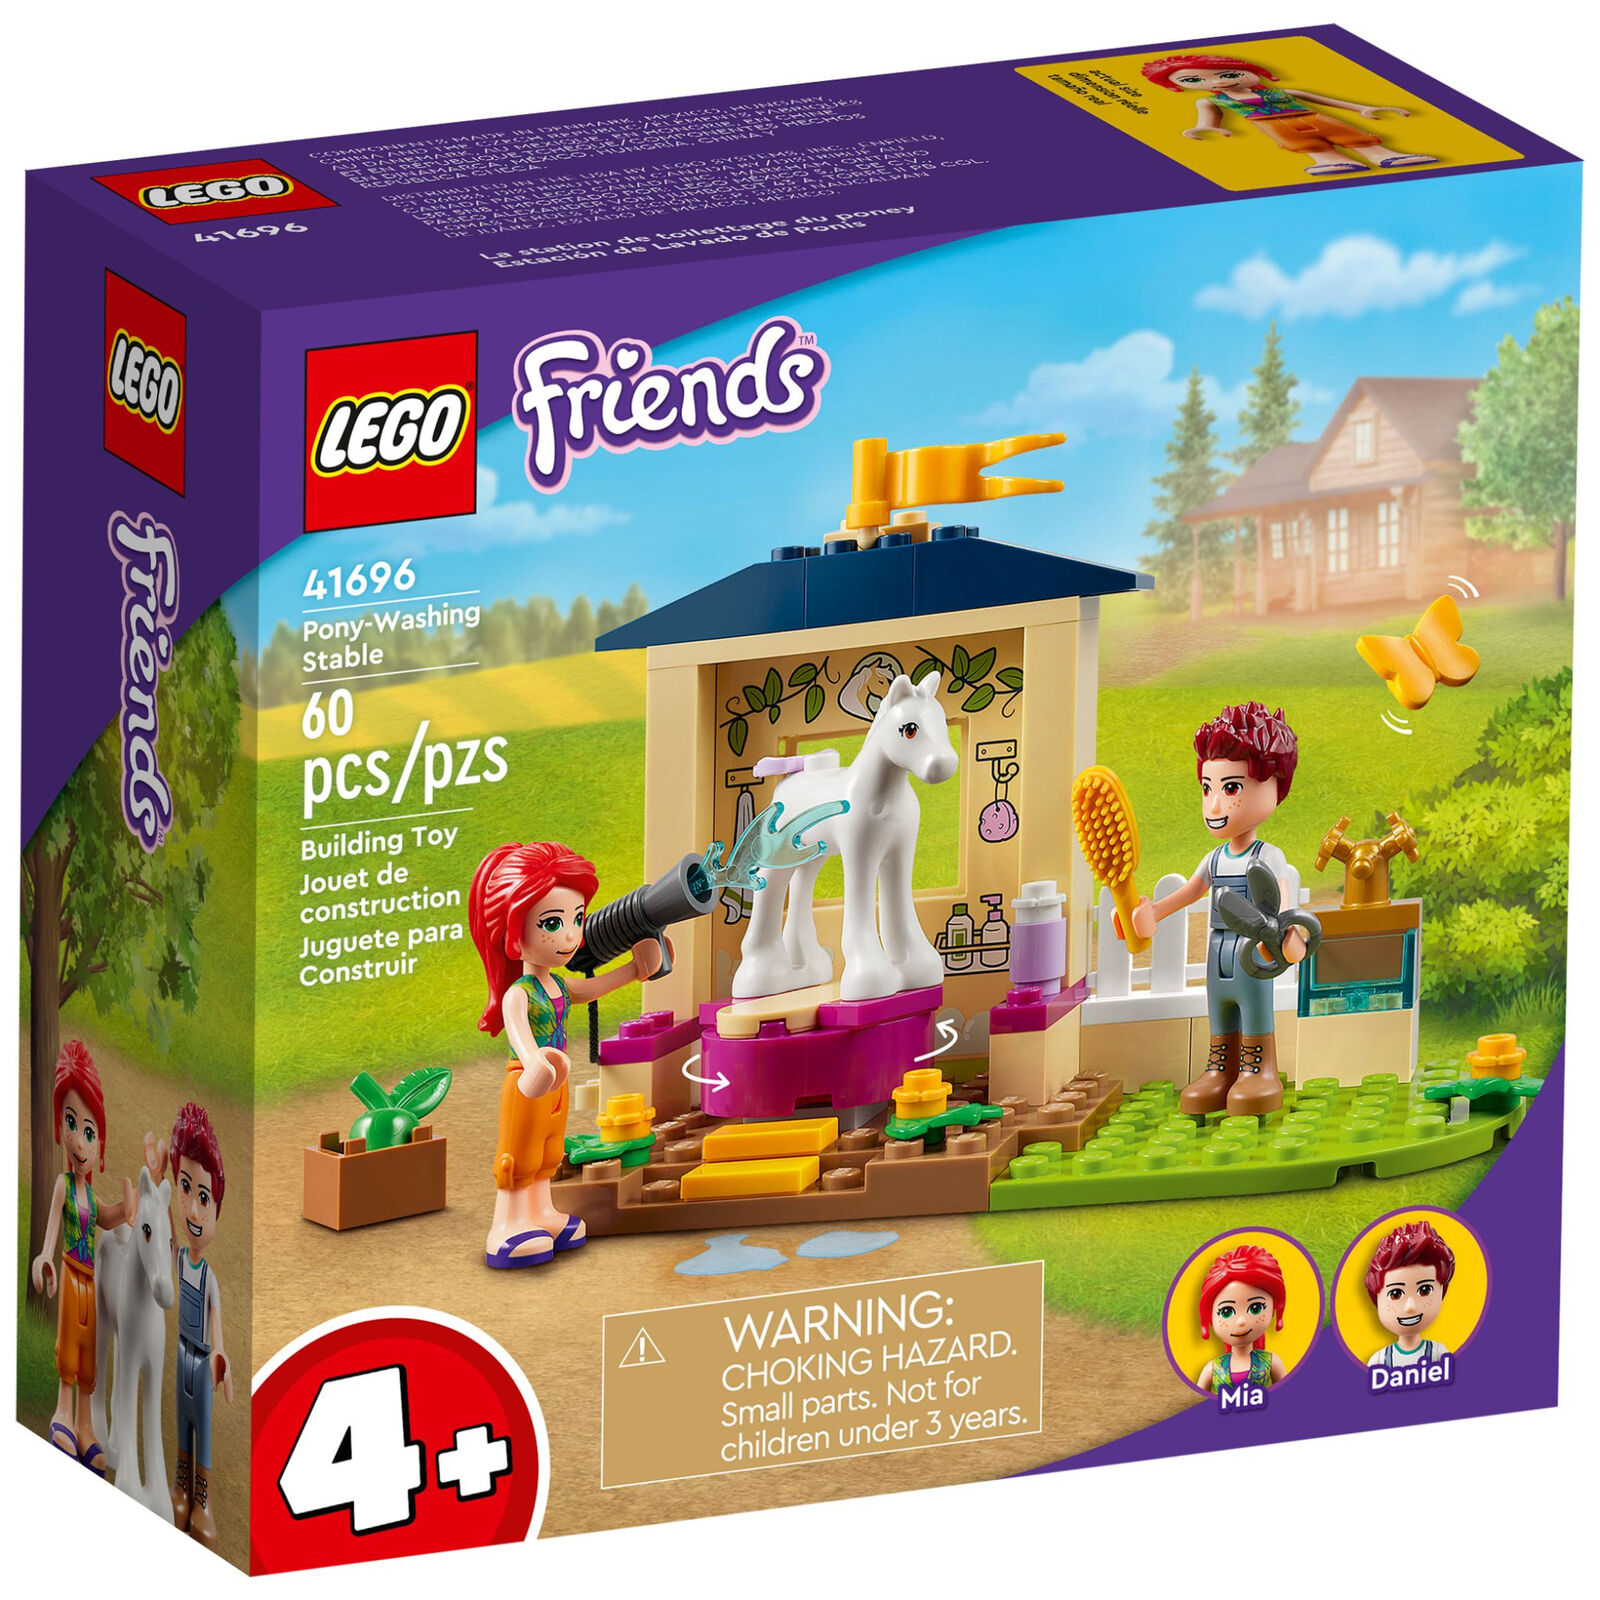 LEGO Friends Sets: 41696 Pony-Washing Stable NEW